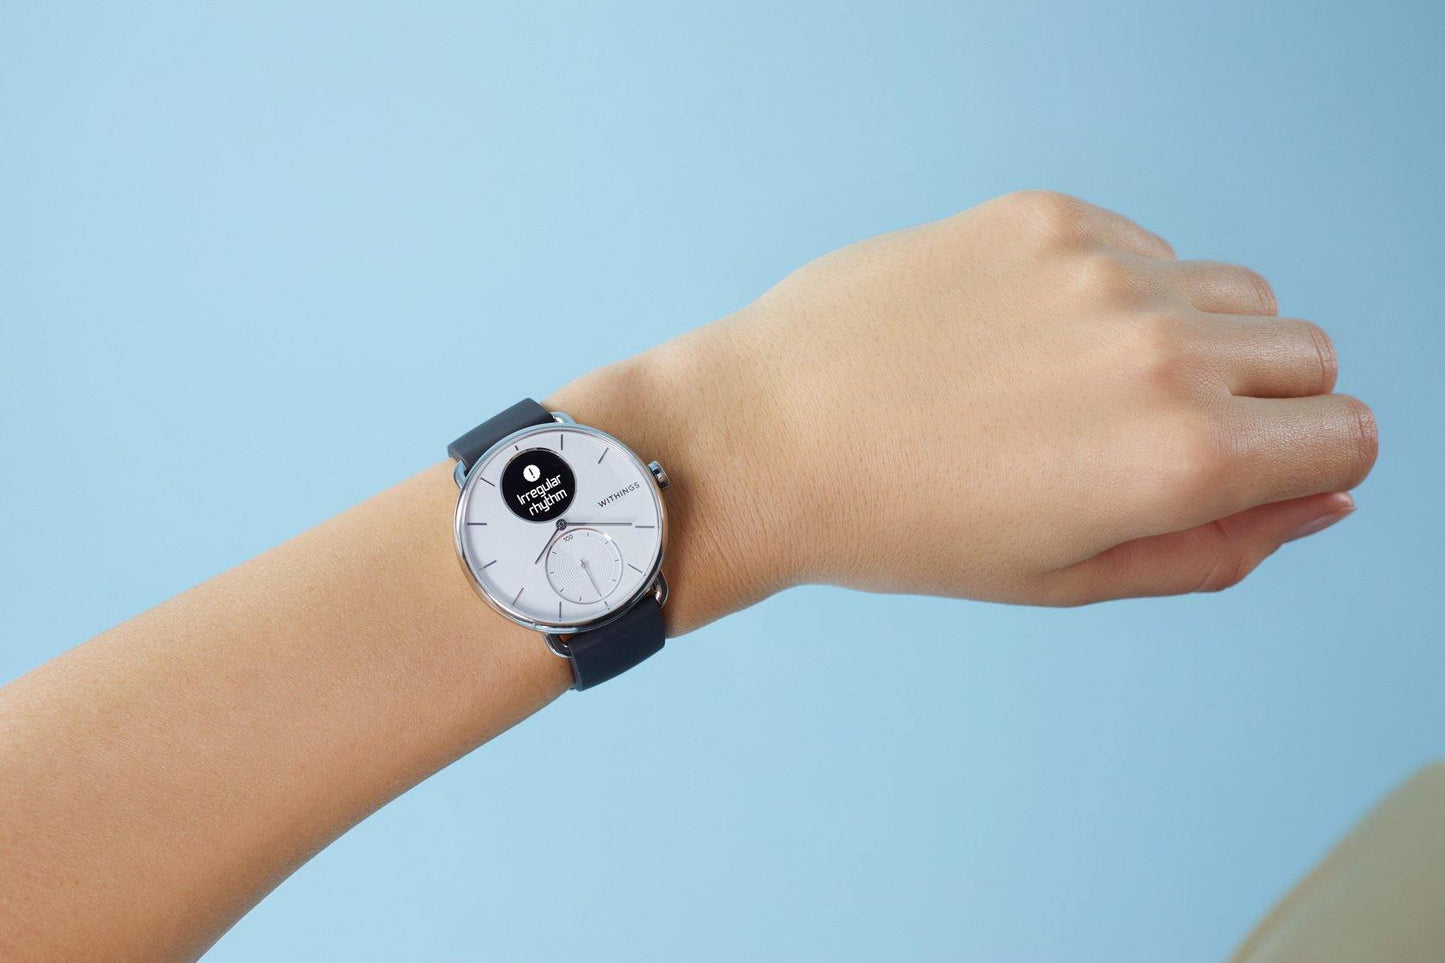 Withings - ScanWatch (38mm-white)